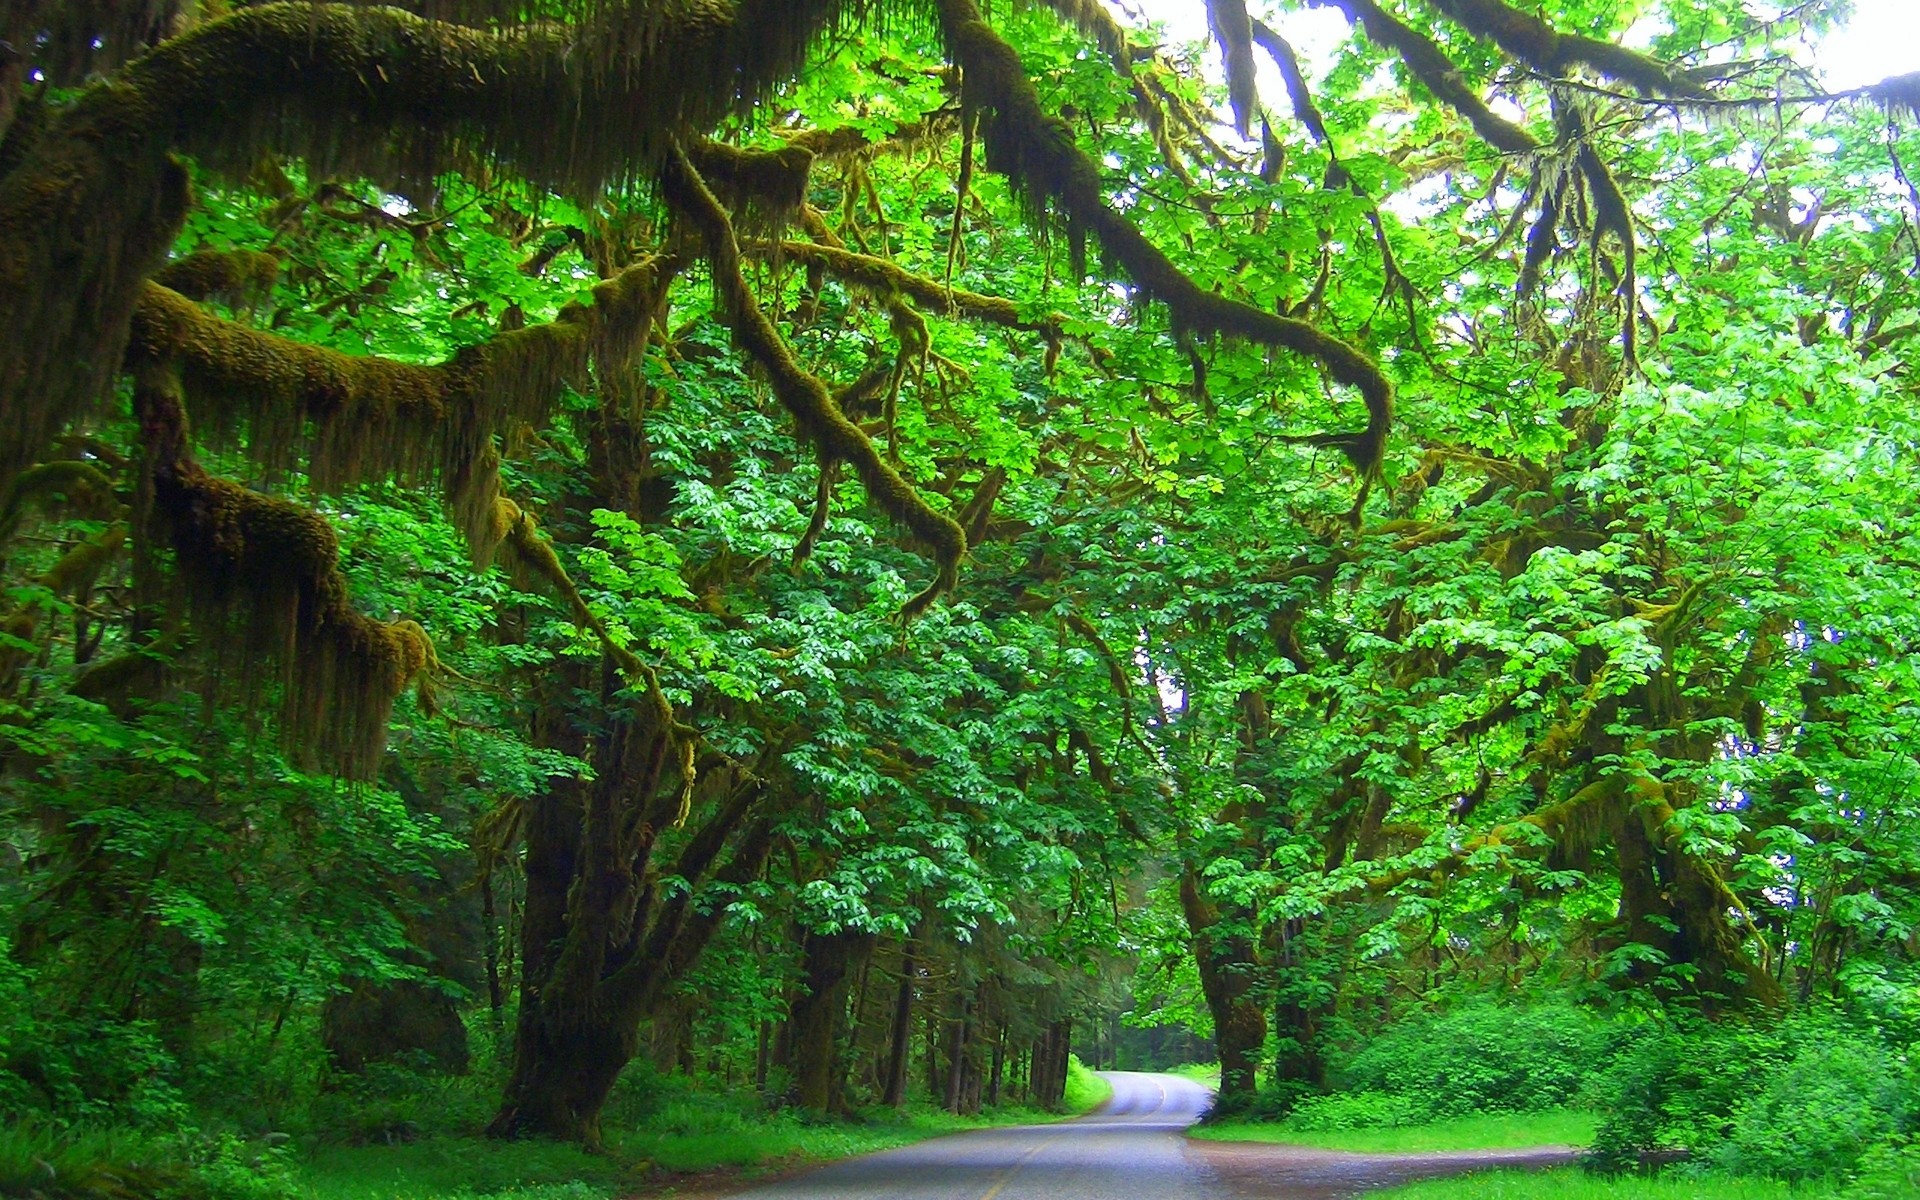 General 1920x1200 nature Washington (state) Olympic National Park trees road grass green shrubs bright branch plants outdoors